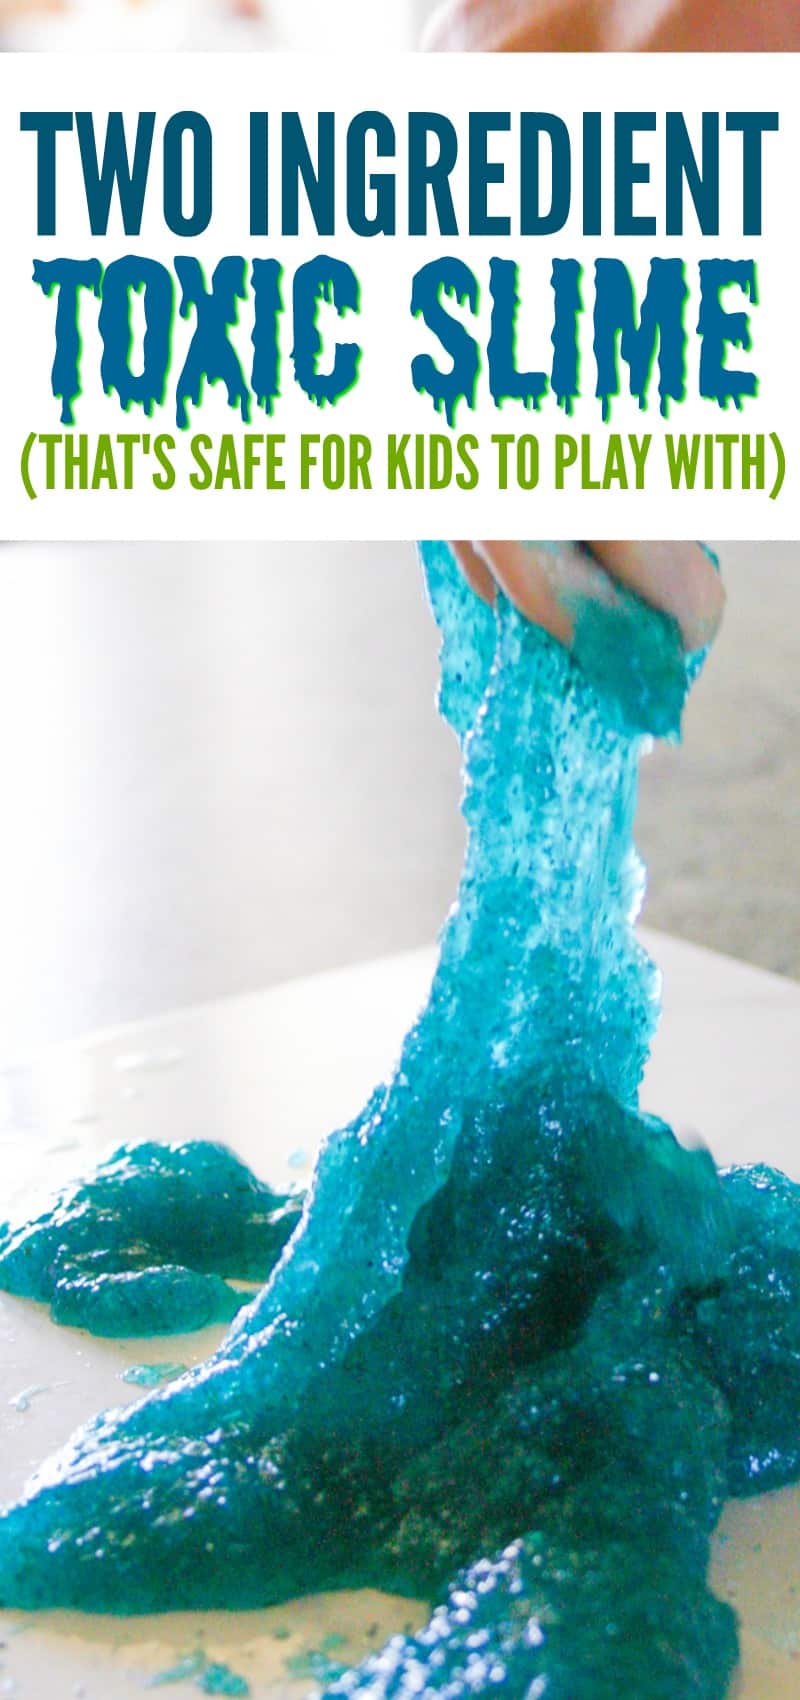 Two Ingredient TOXIC SLIME for Halloween (and i's not really toxic so super safe for kids to play with)